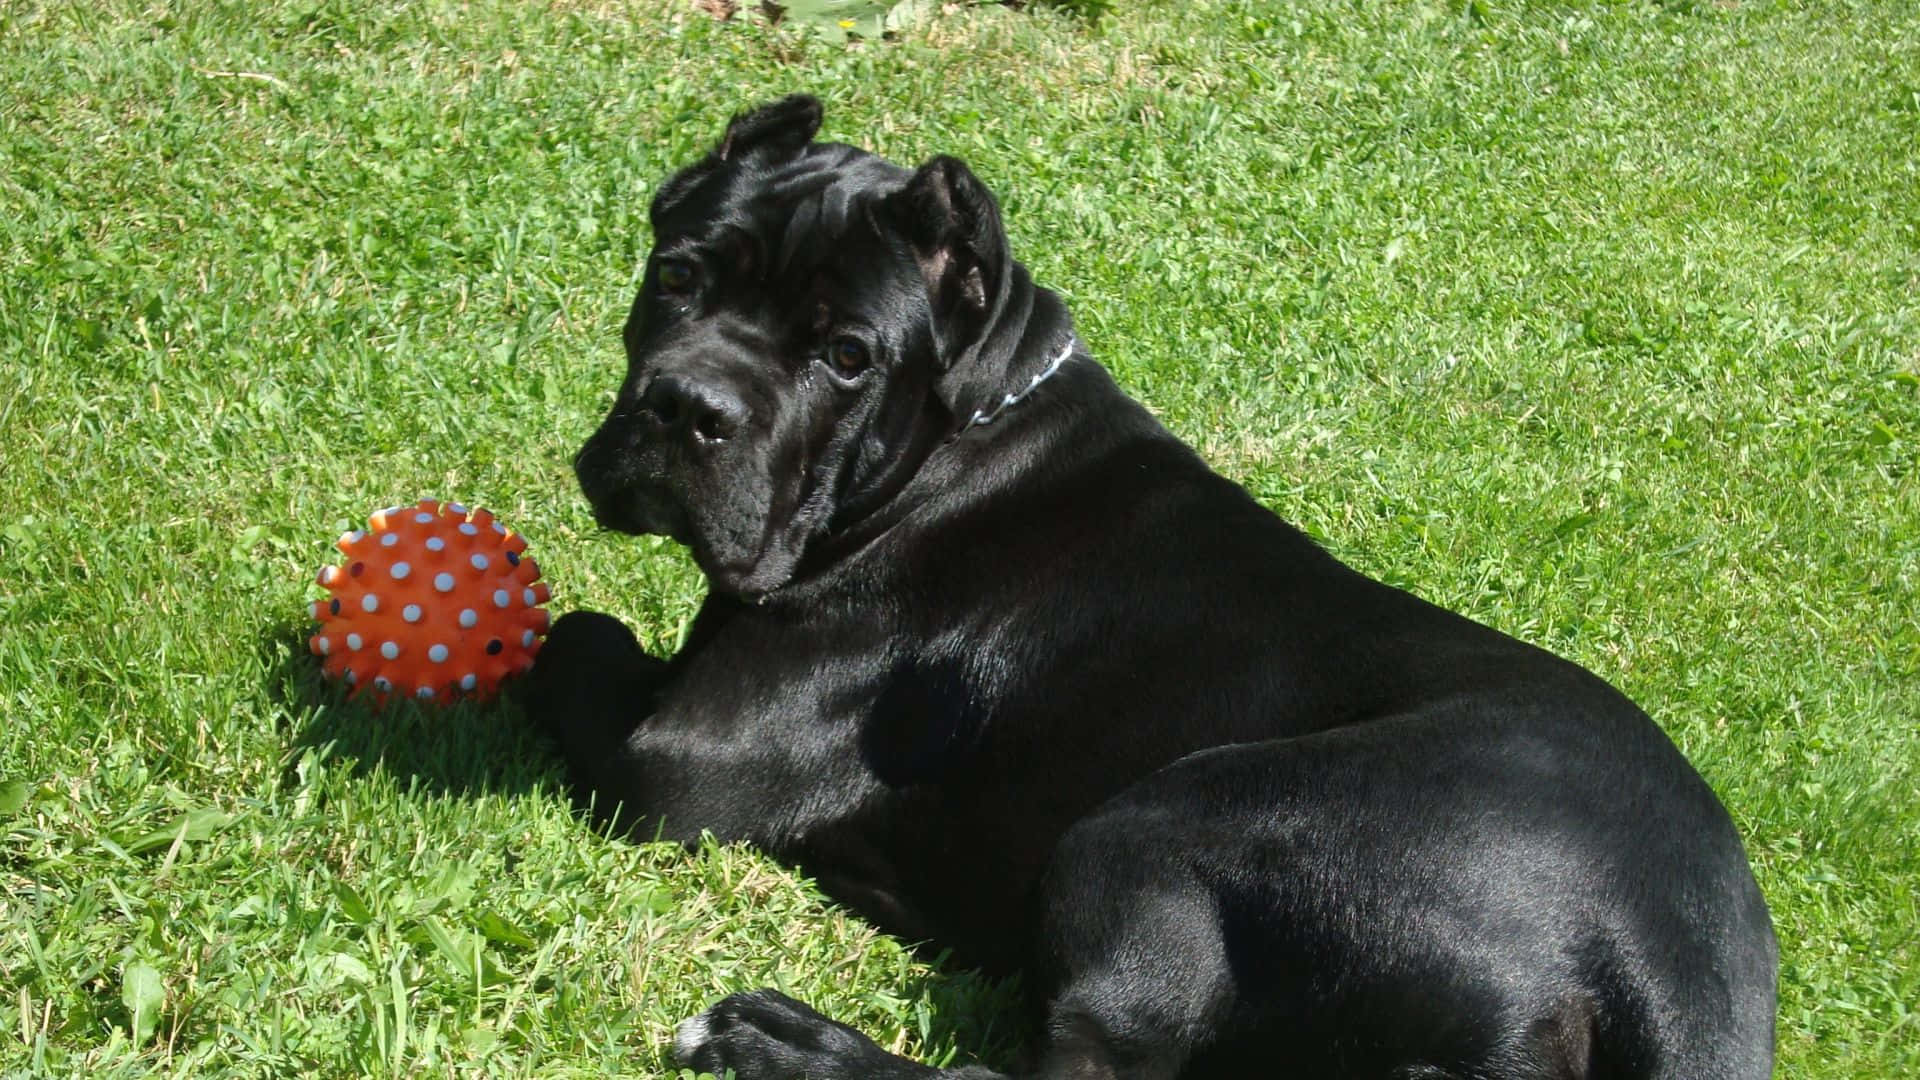 Loyalty, Strength, Elegance - The Face of a Cane Corso